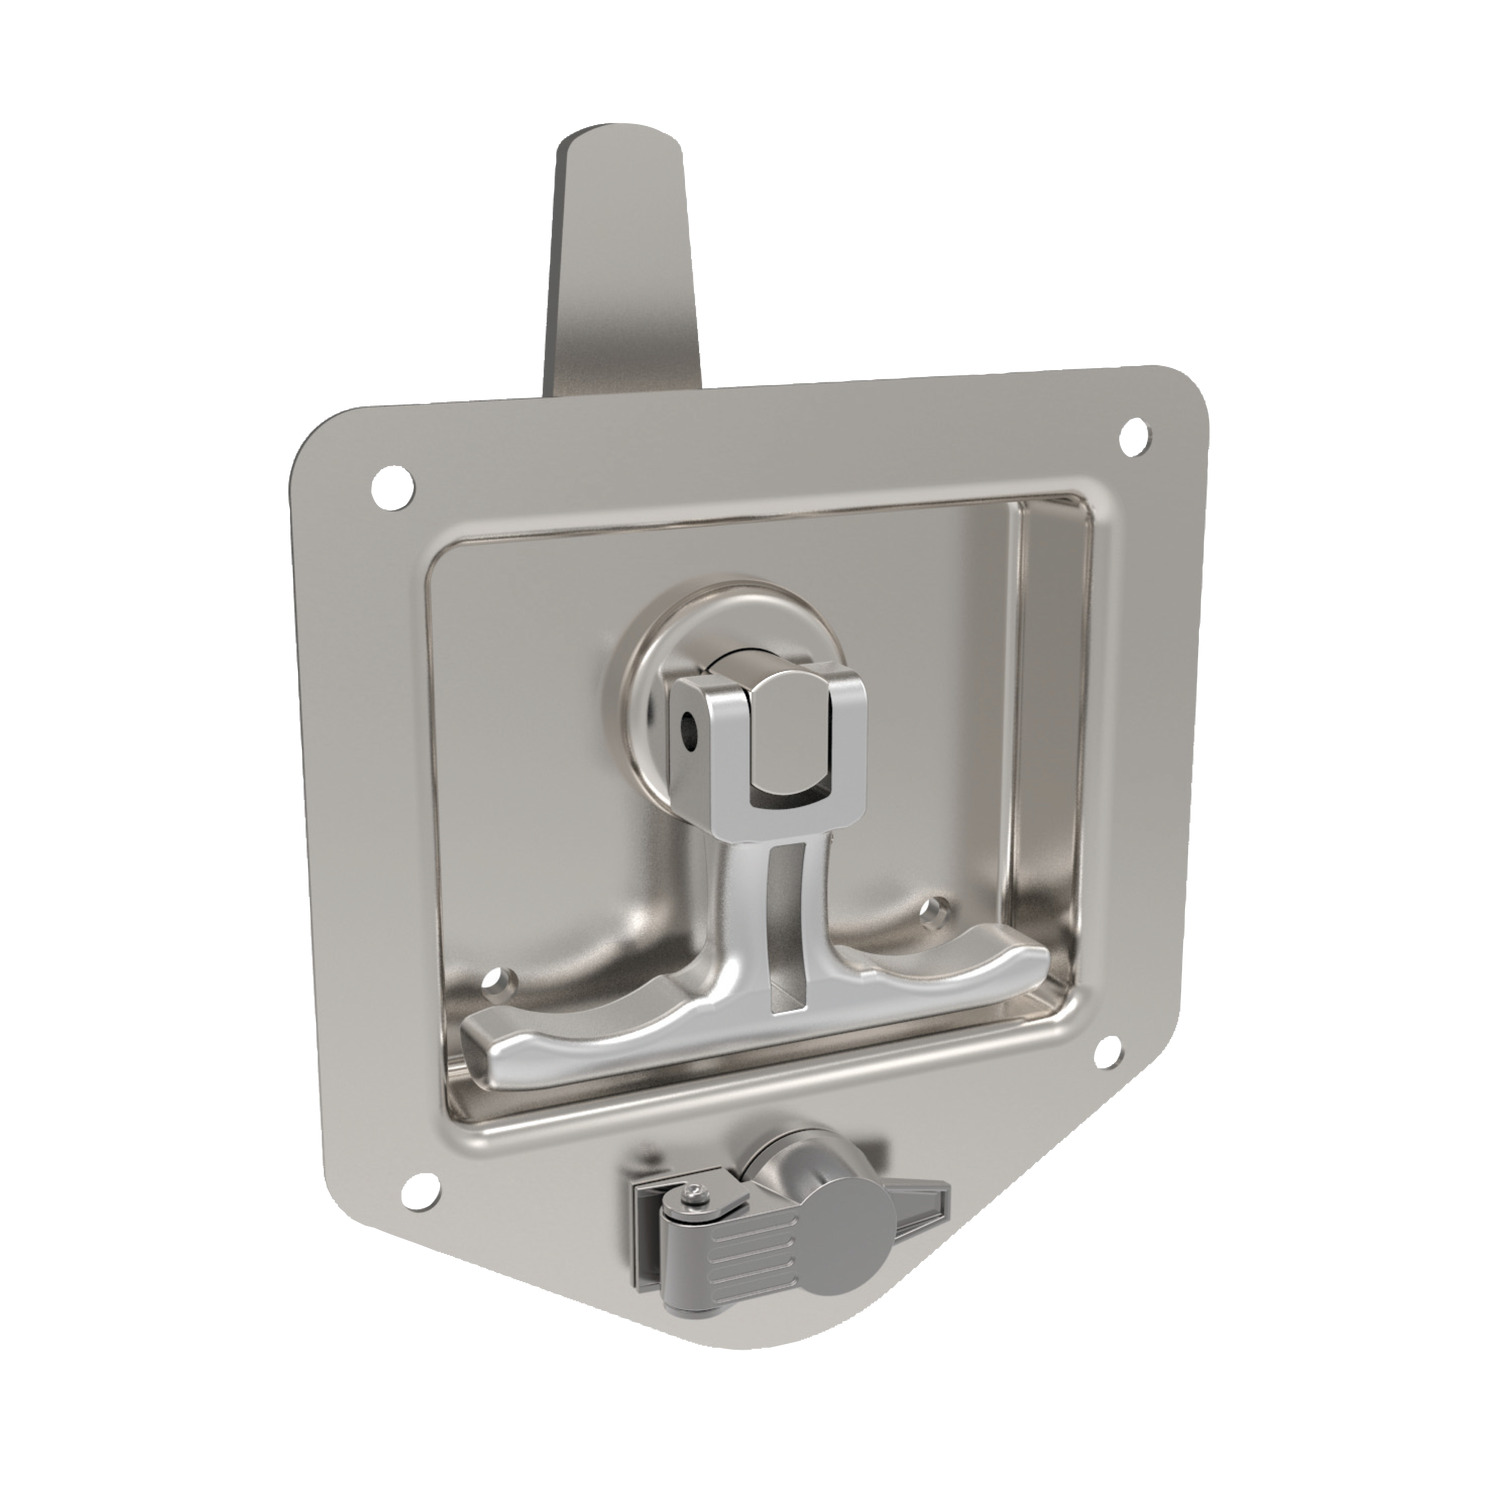 Product B4588, Cam Latch - Flush T-handle vertical - heavy duty - adjustable grip - standard cylinder lock - stainless / 